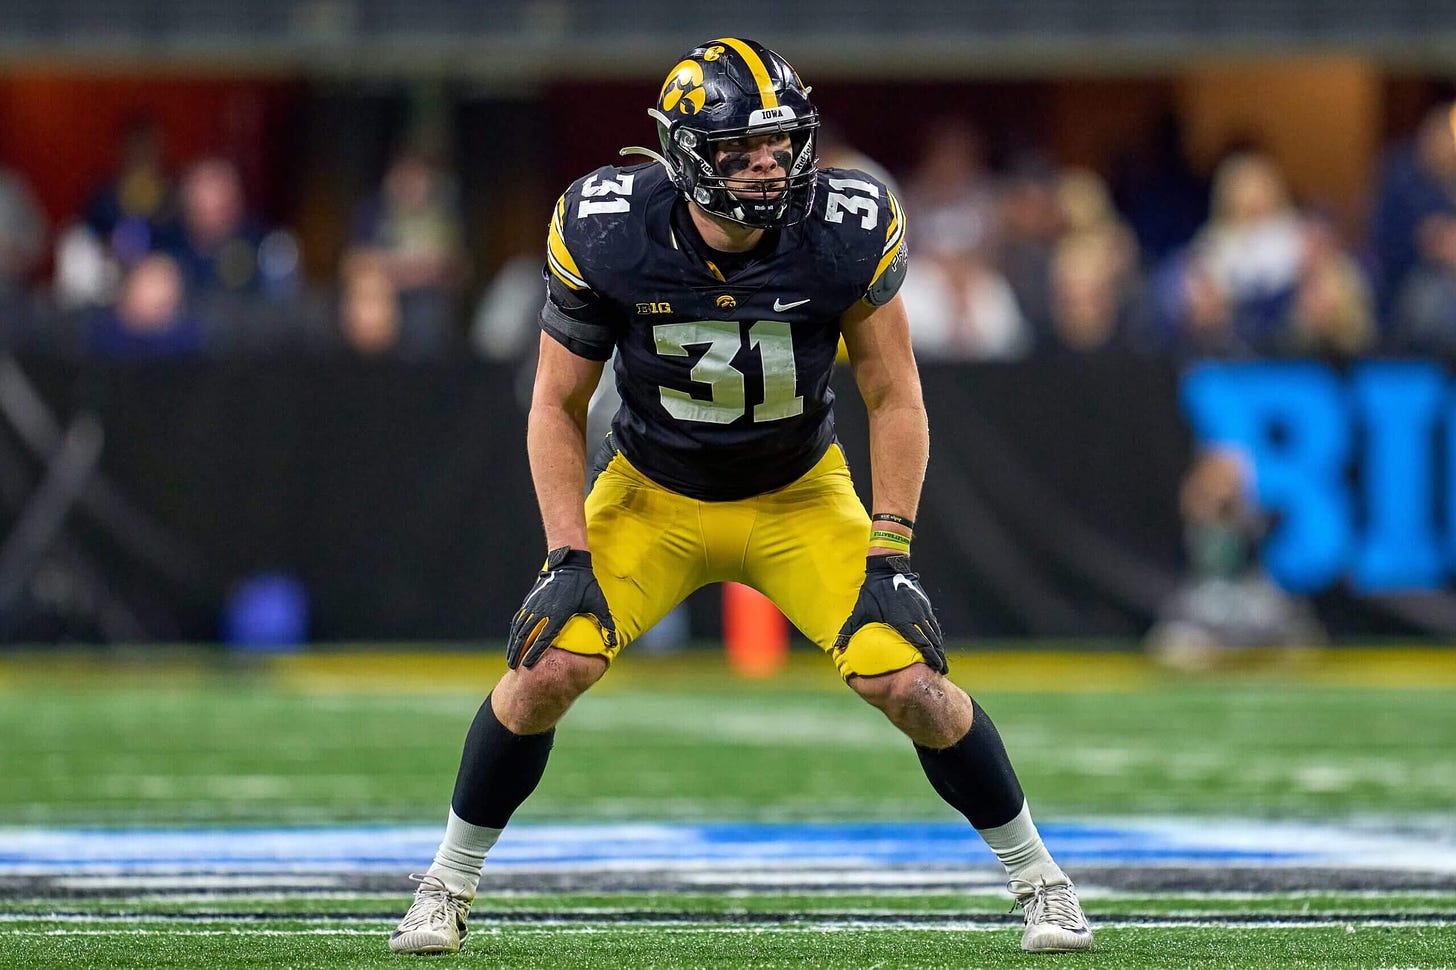 Iowa's Jack Campbell knows his why, leads the way for Hawkeyes' defense -  The Athletic